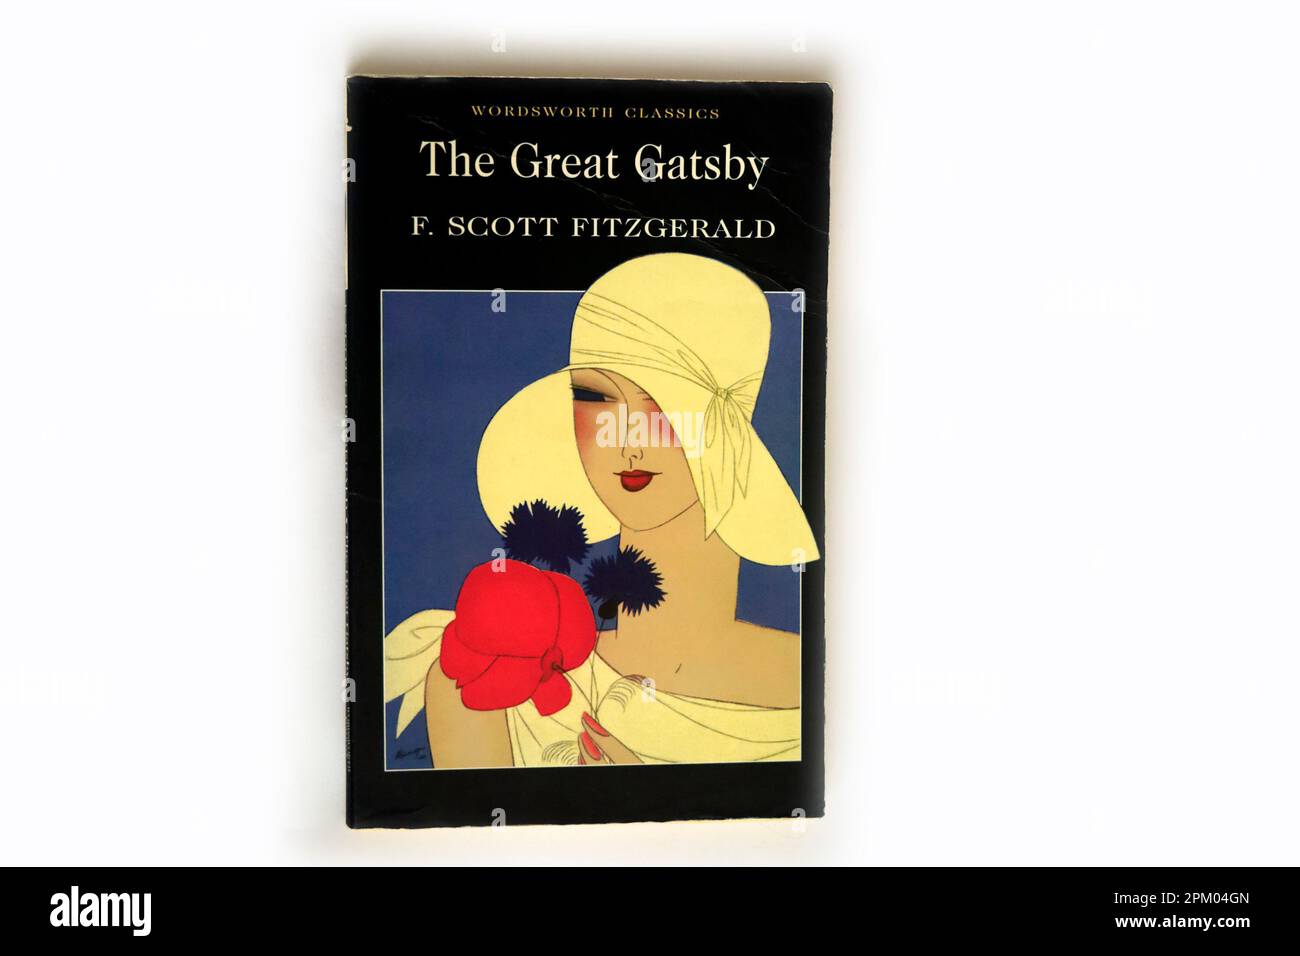 Book cover, paperback, The Great Gatsby by F Scott Fitzgerald. Wordsworth Classics edition. Stock Photo